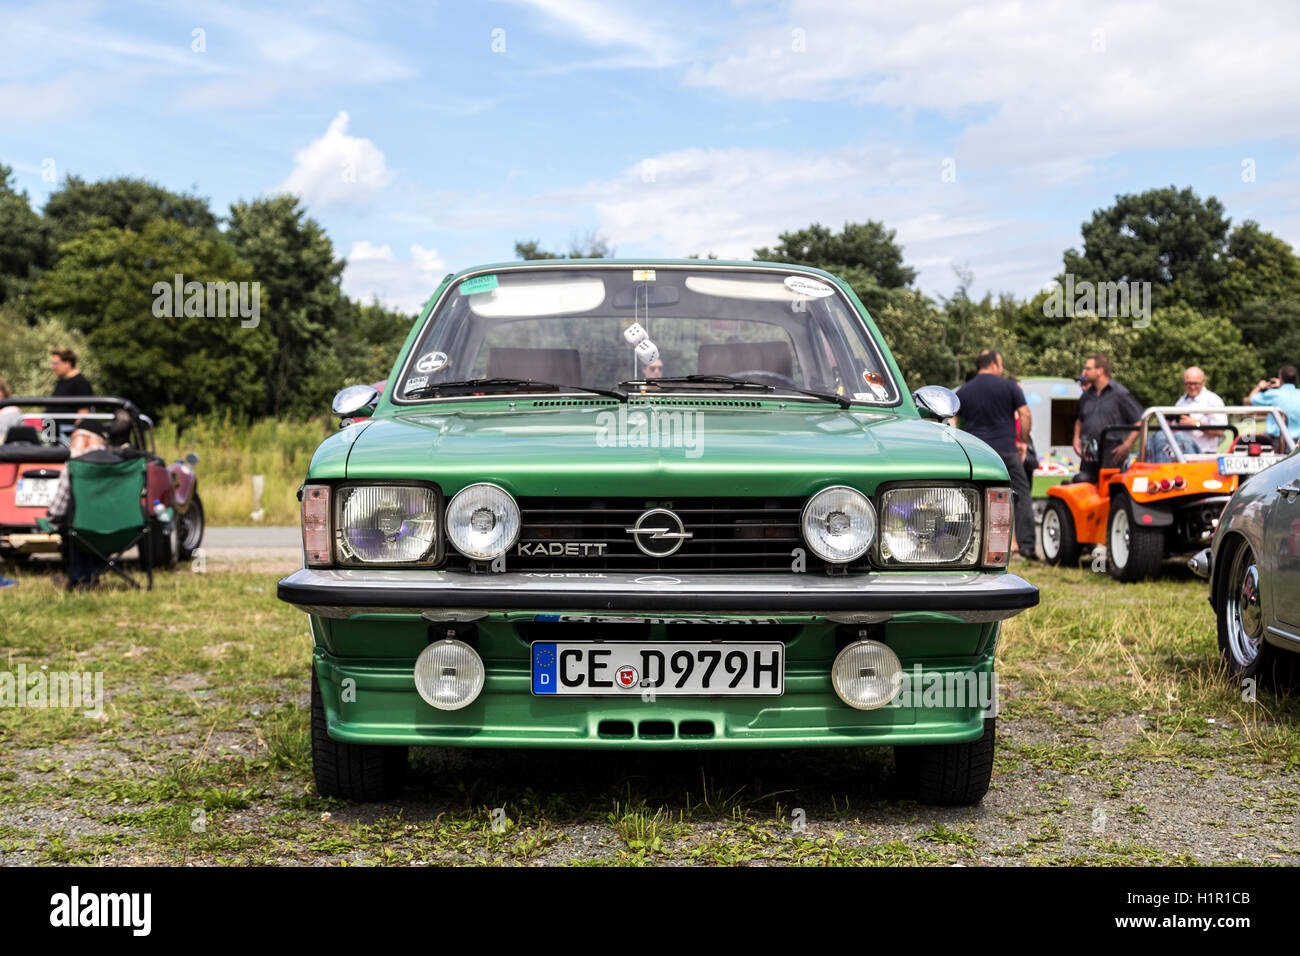 Opel Kadett High Resolution Stock Photography and Images - Alamy